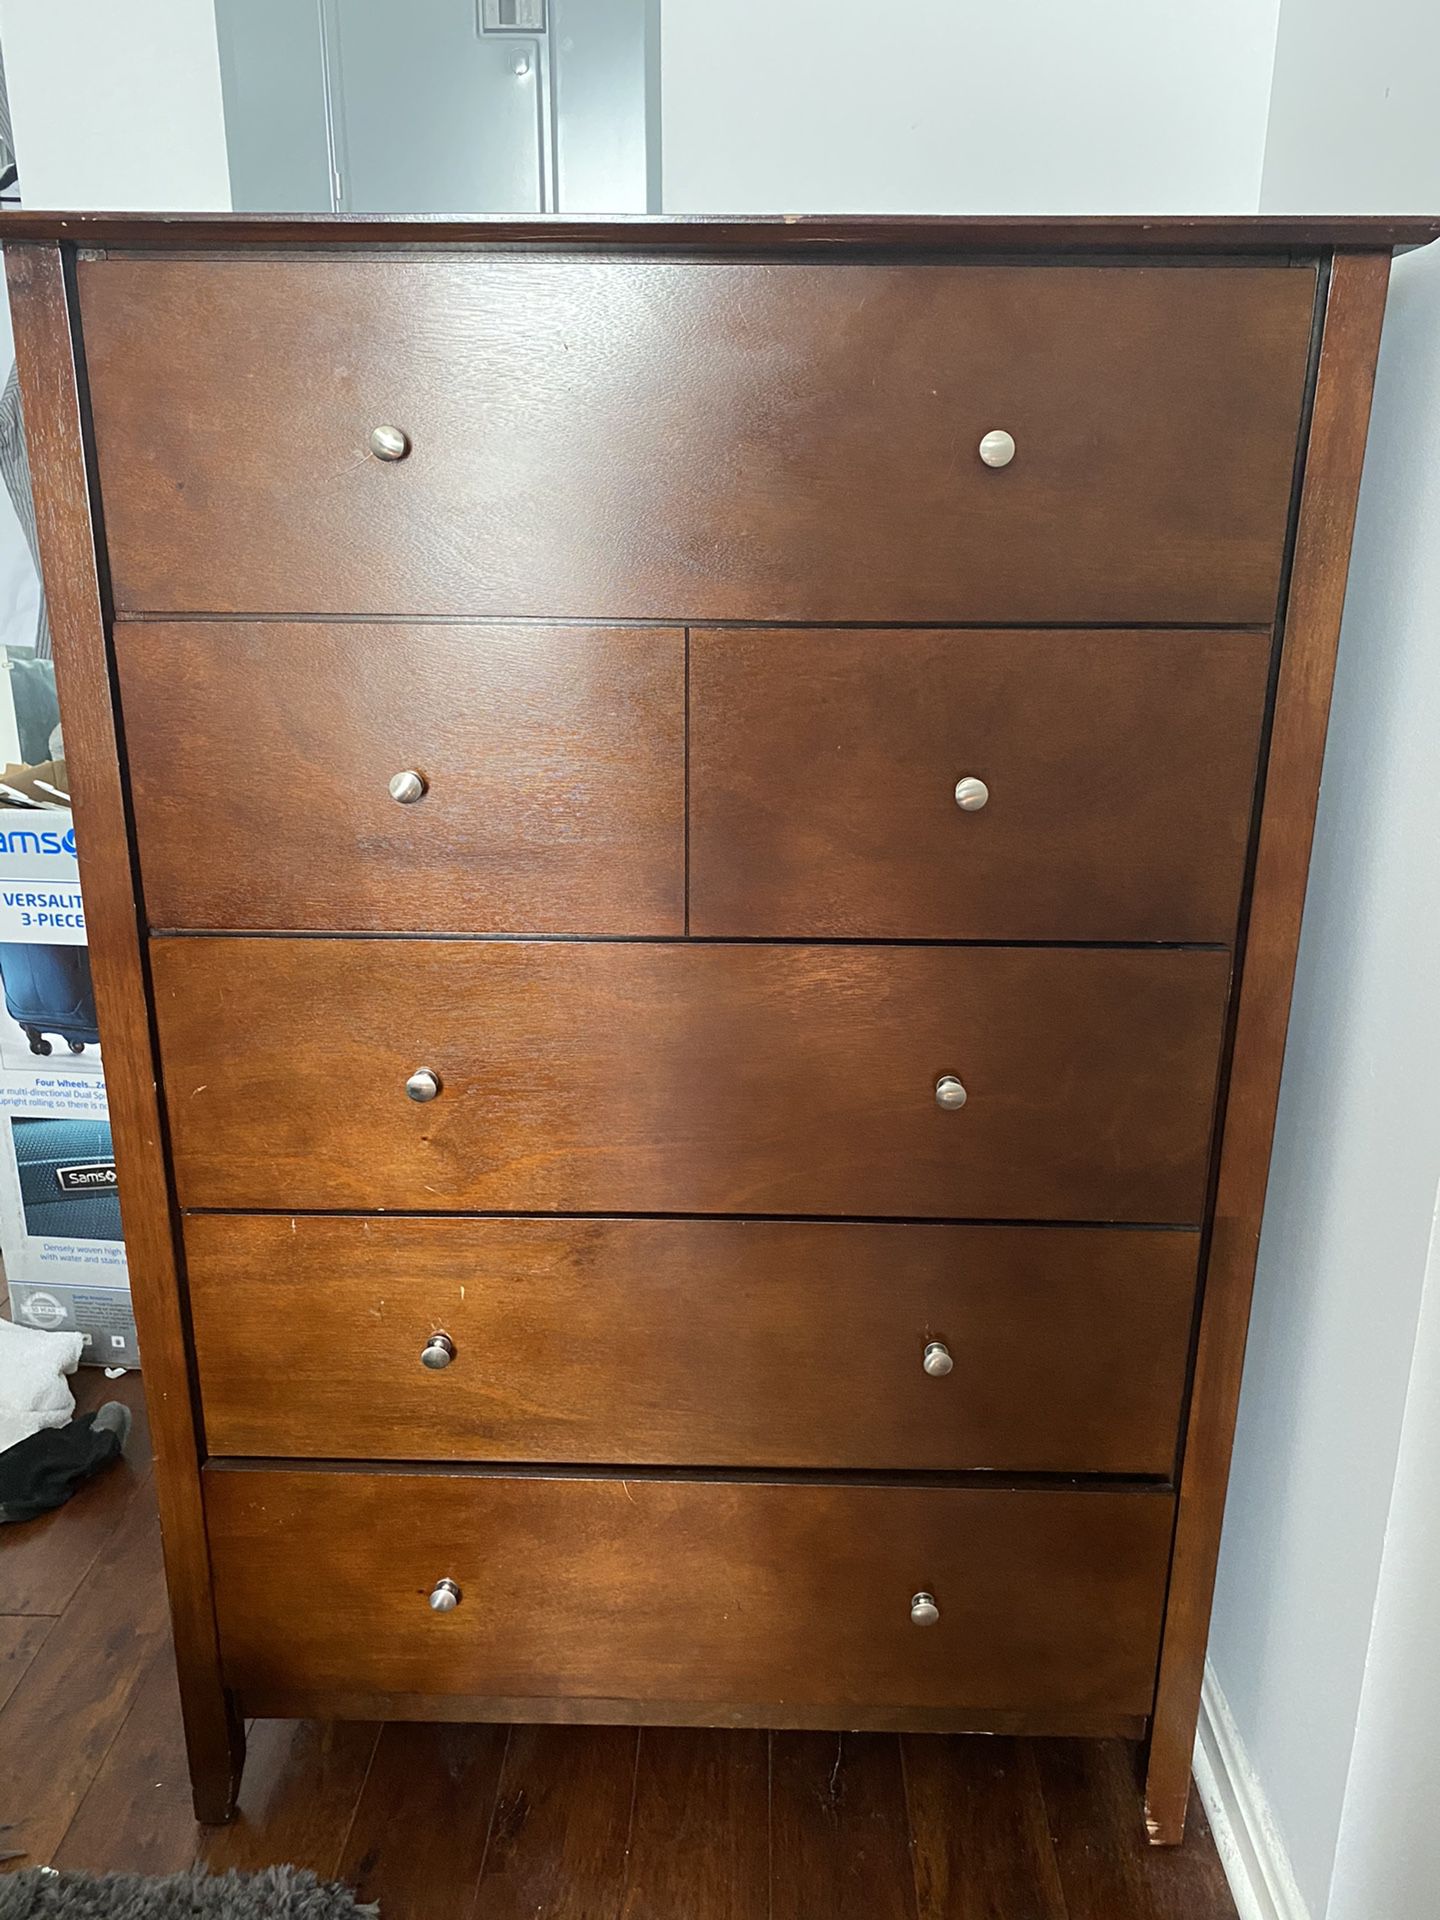 5-Drawer tall dresser, original owner, sturdy, and absolutely great condition